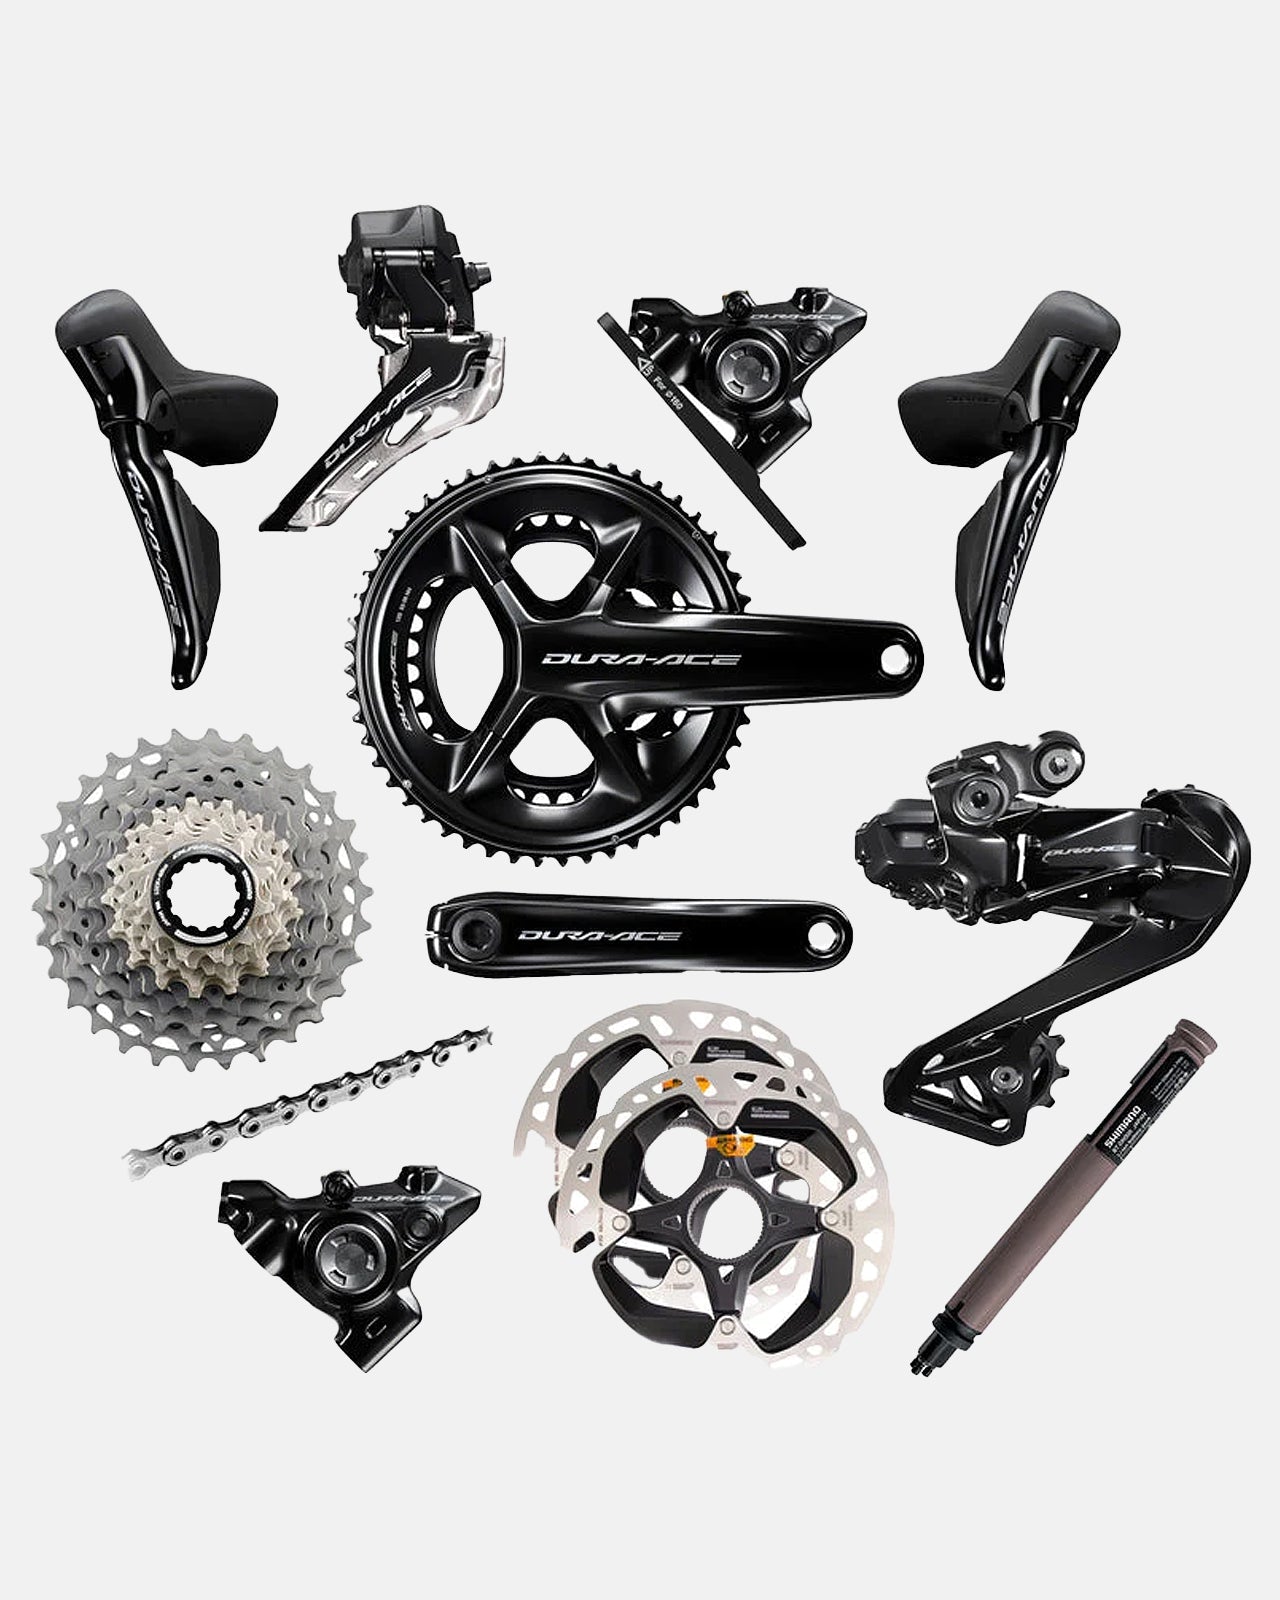 Shimano Dura-Ace R9270 Di2 12 Speed Groupset - Disc